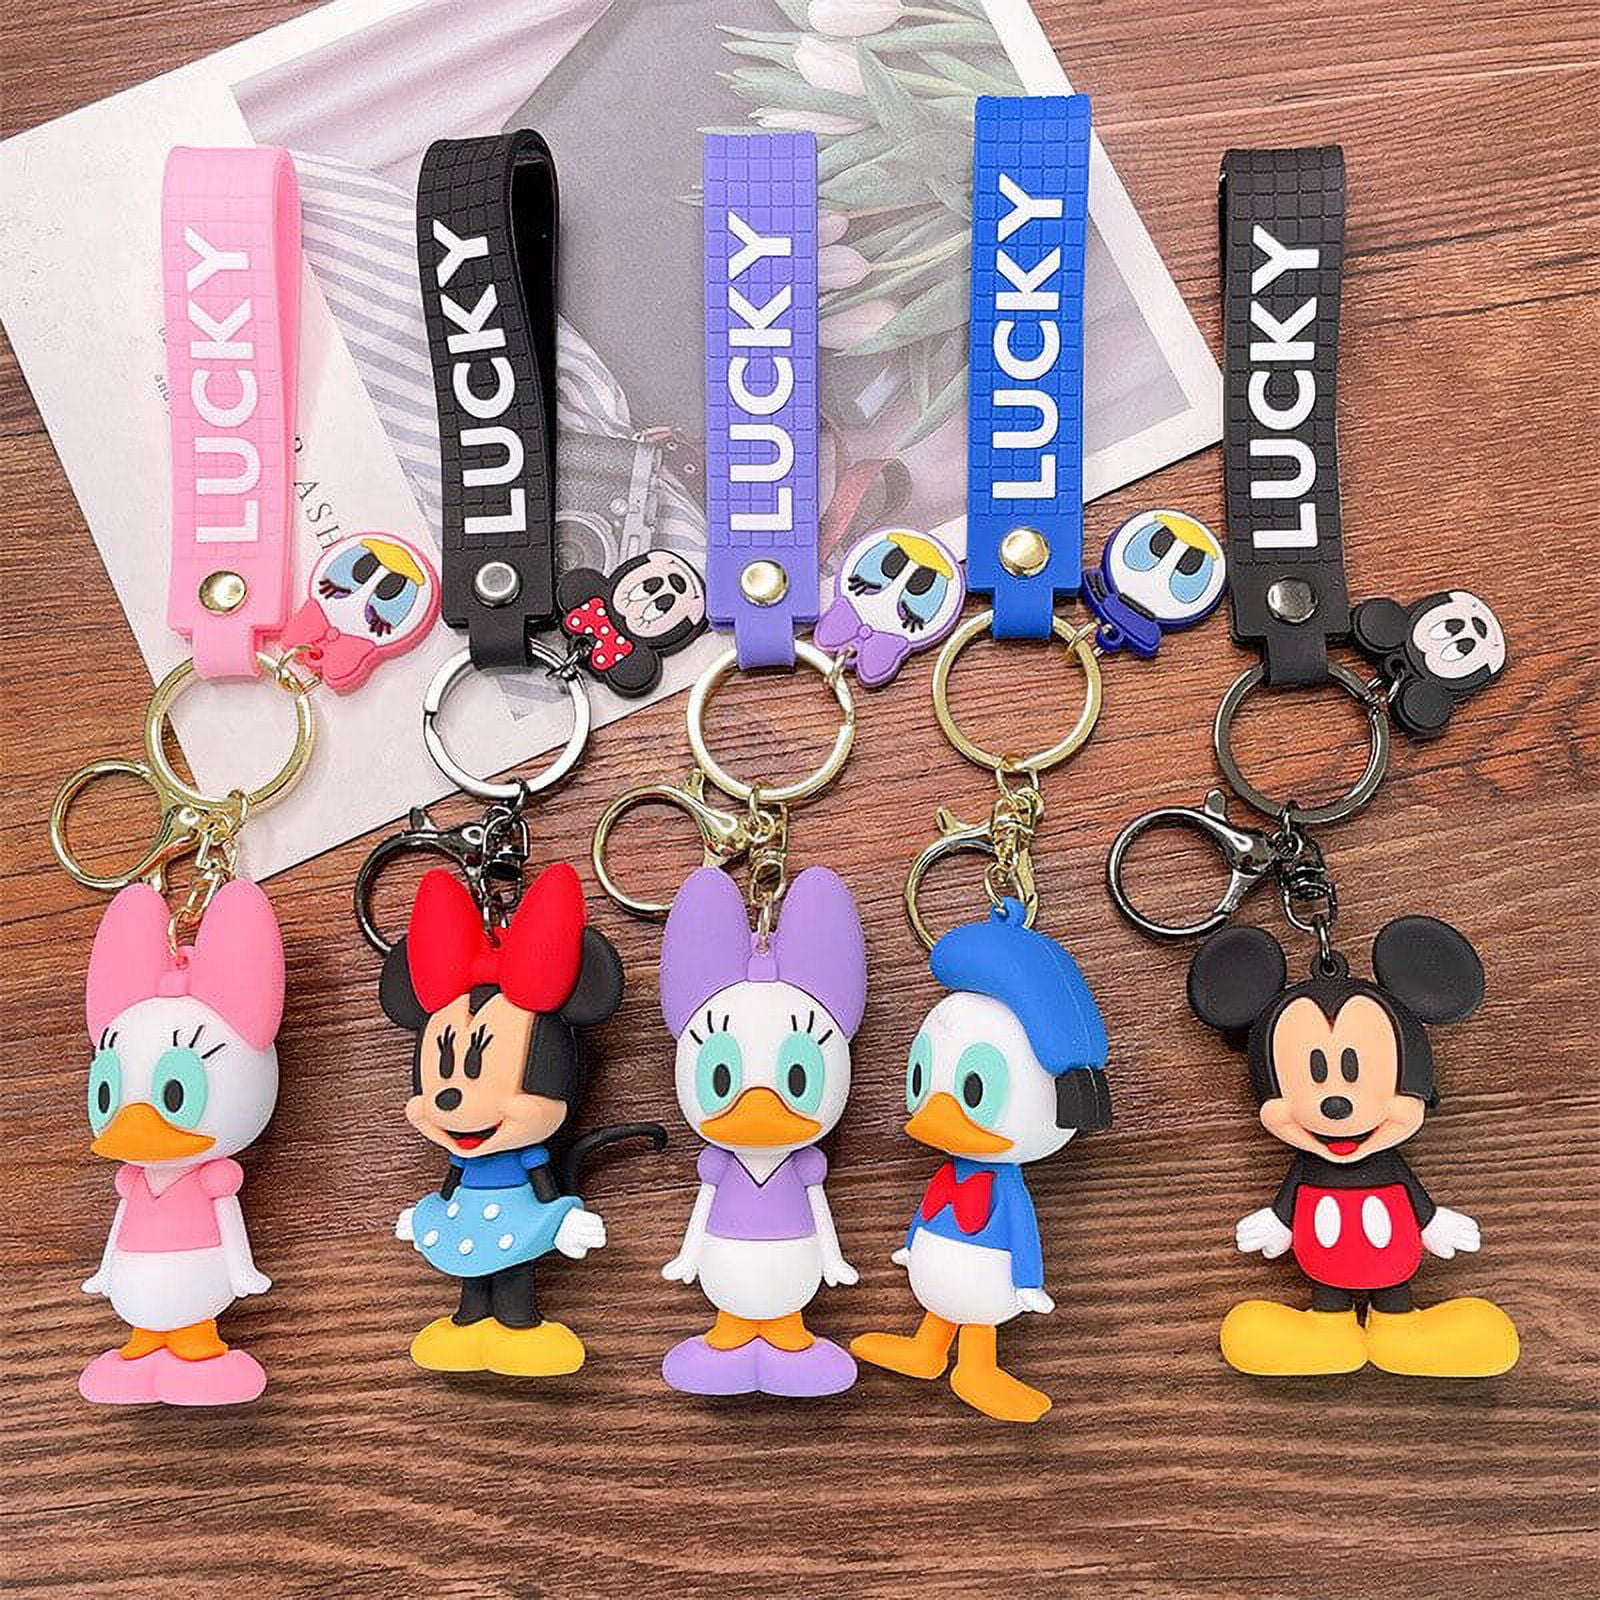 Disney Keychains Creative Anime Cartoon Key Chain Ornaments Dolls Mickey  Mouse Minnie Mouse For Kids Toys Bag Pendant Gifts